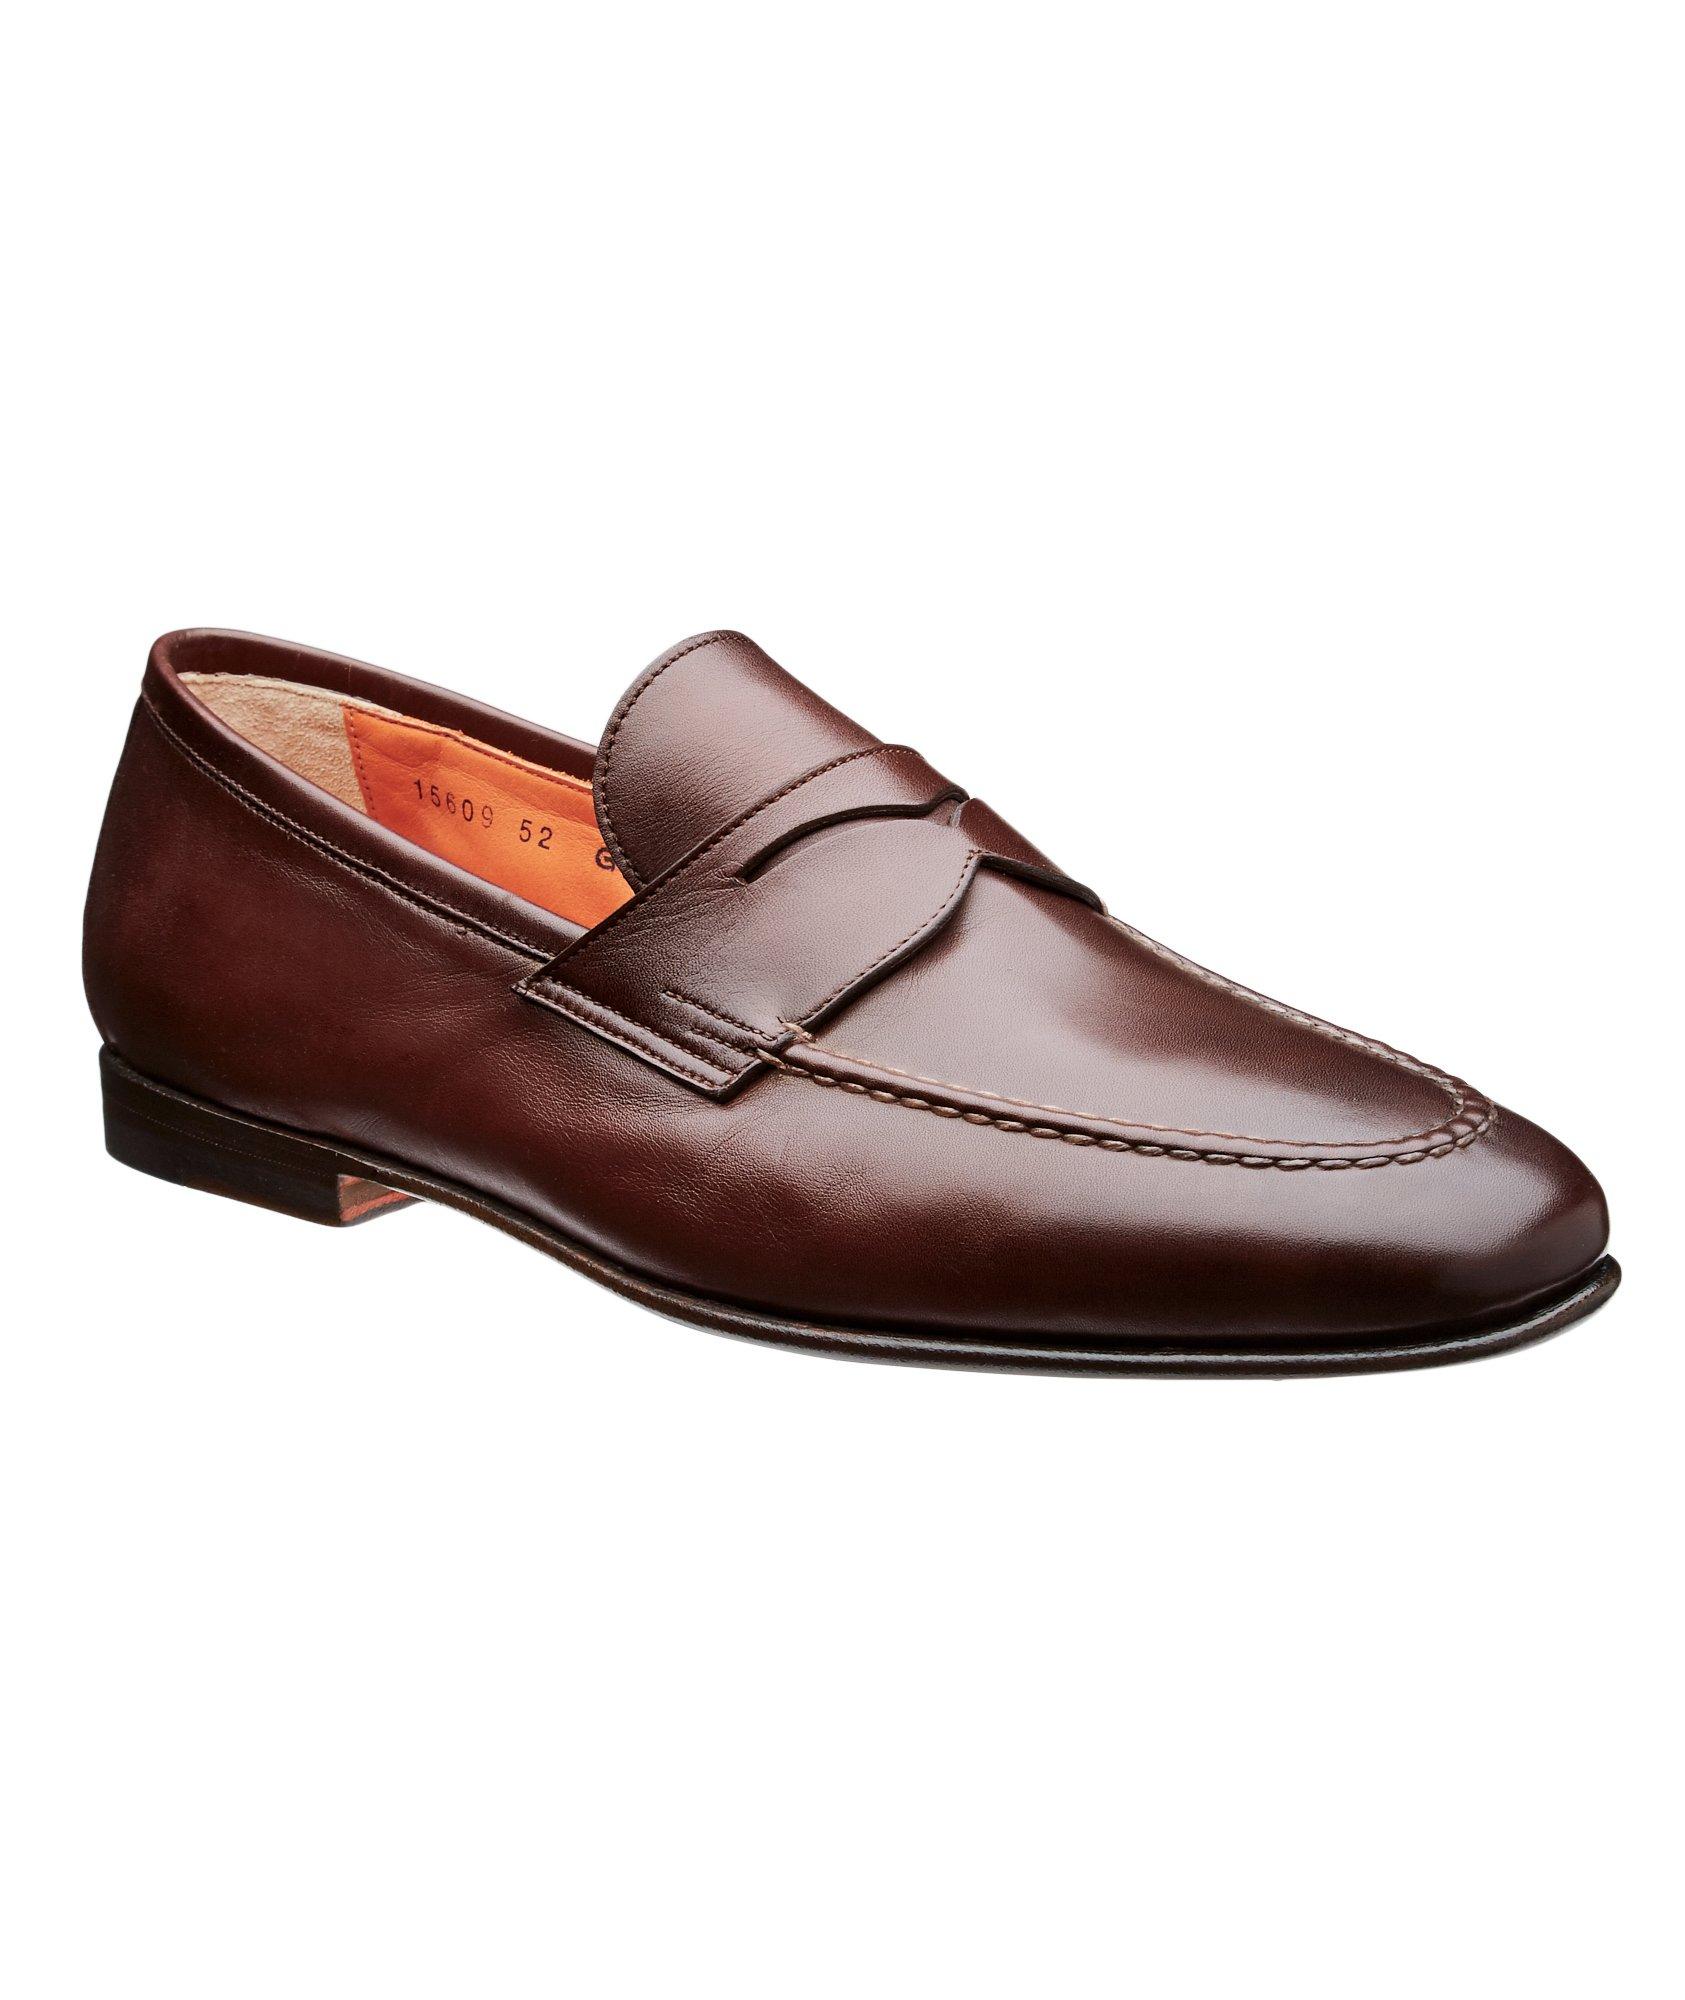  Leather Penny Loafers image 0